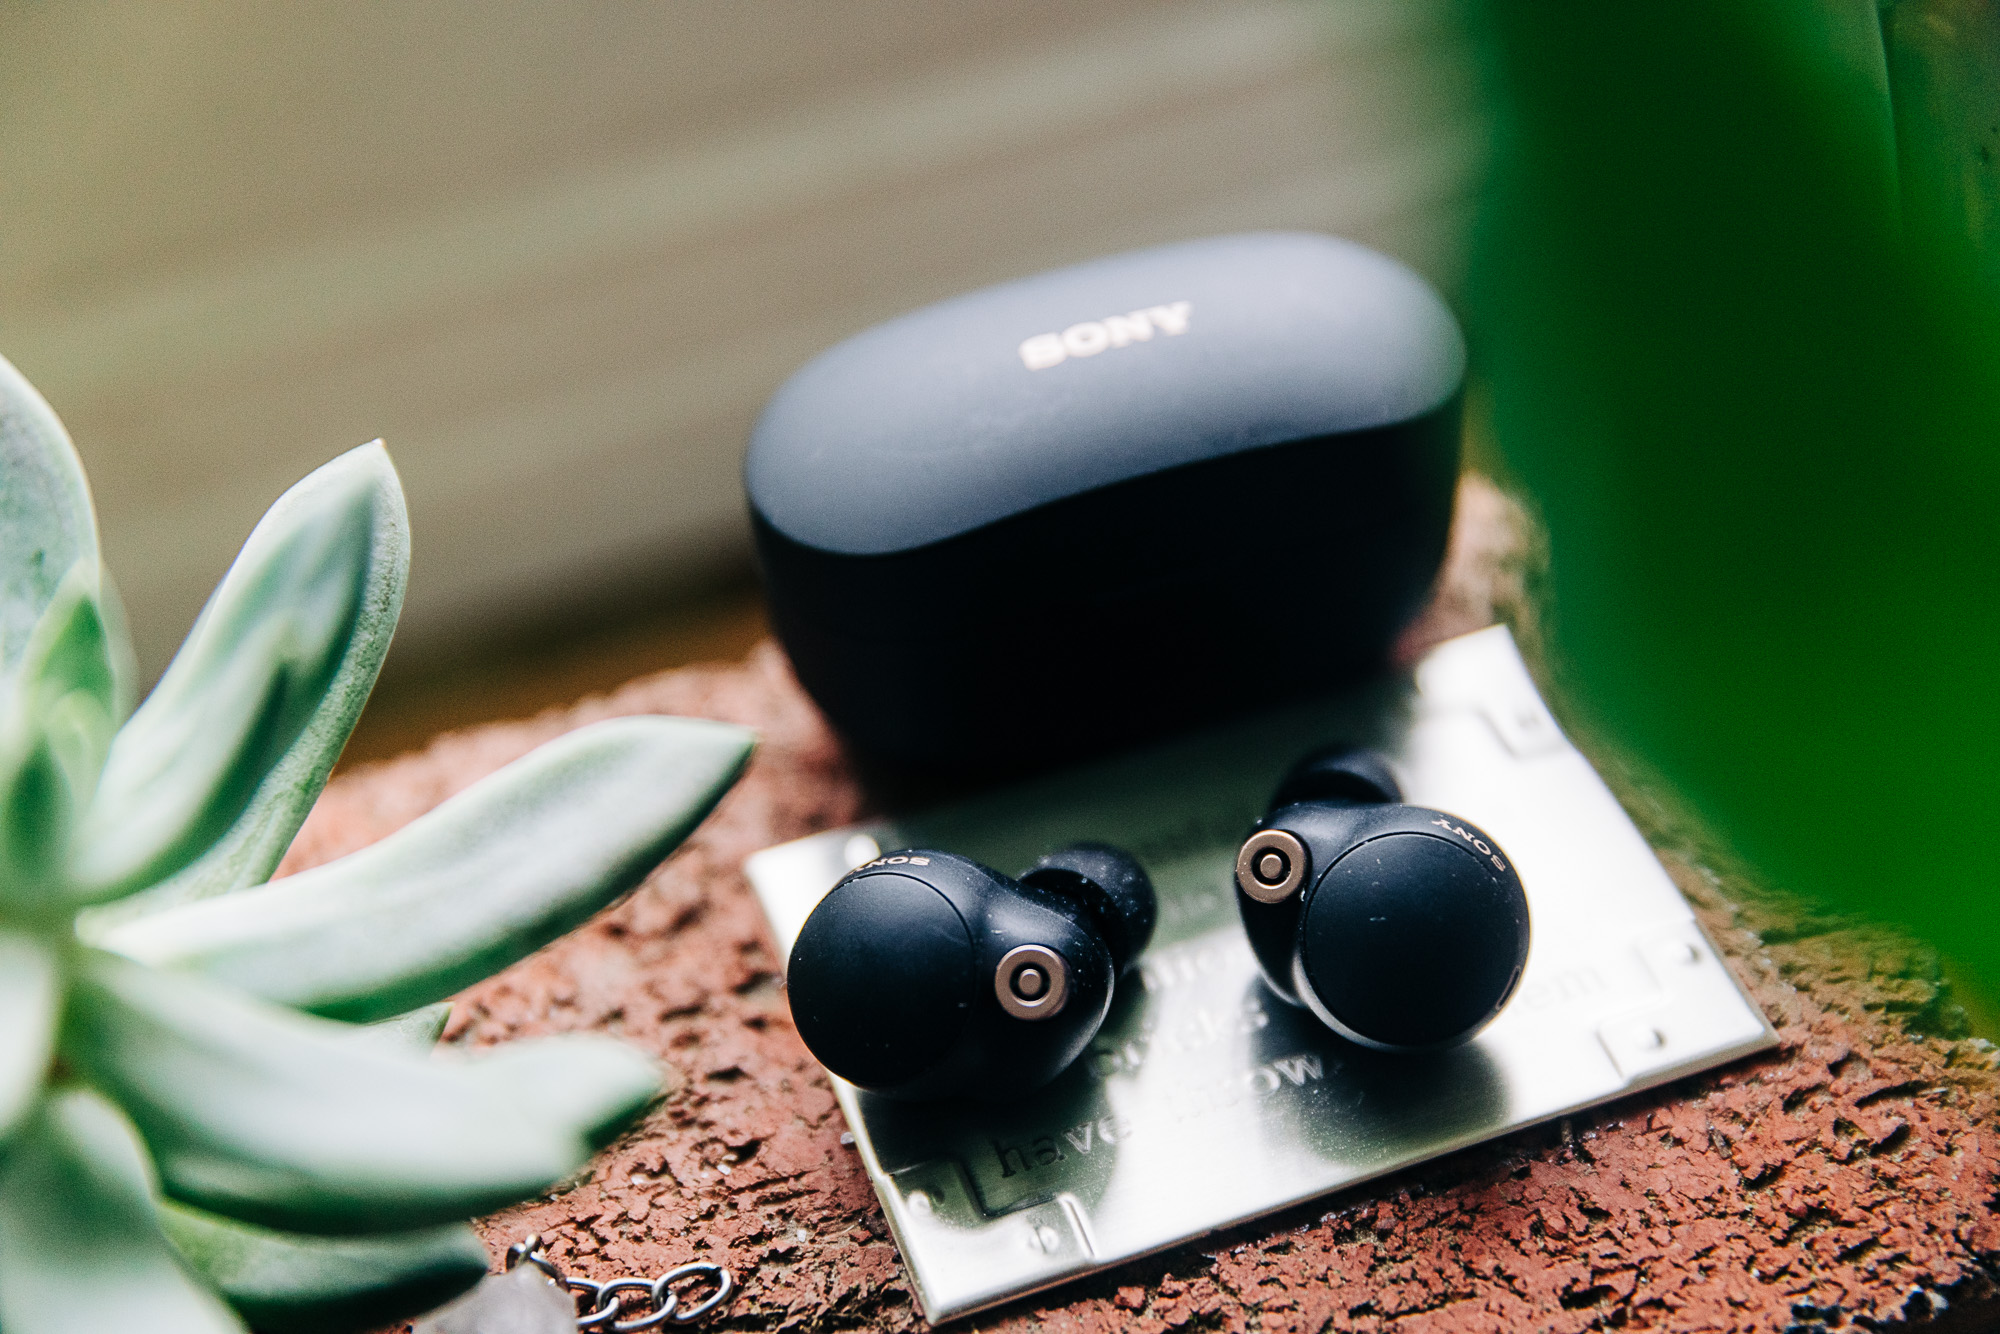 Sony WF-1000XM3 Review: These earbuds sound great if you can get them in  your ears